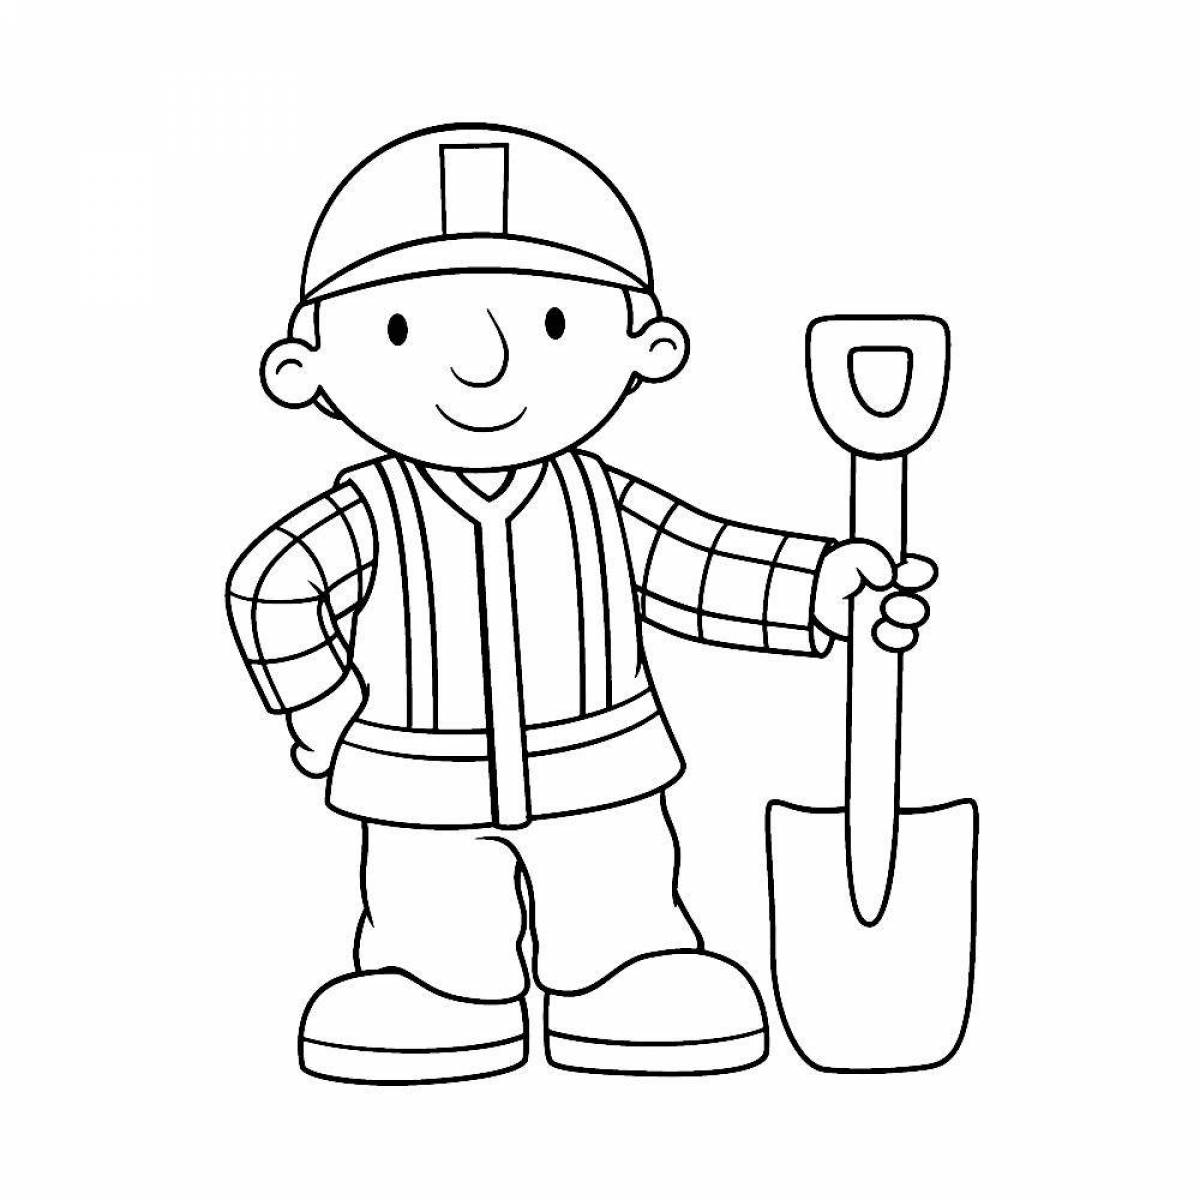 Creative builder coloring book for kids